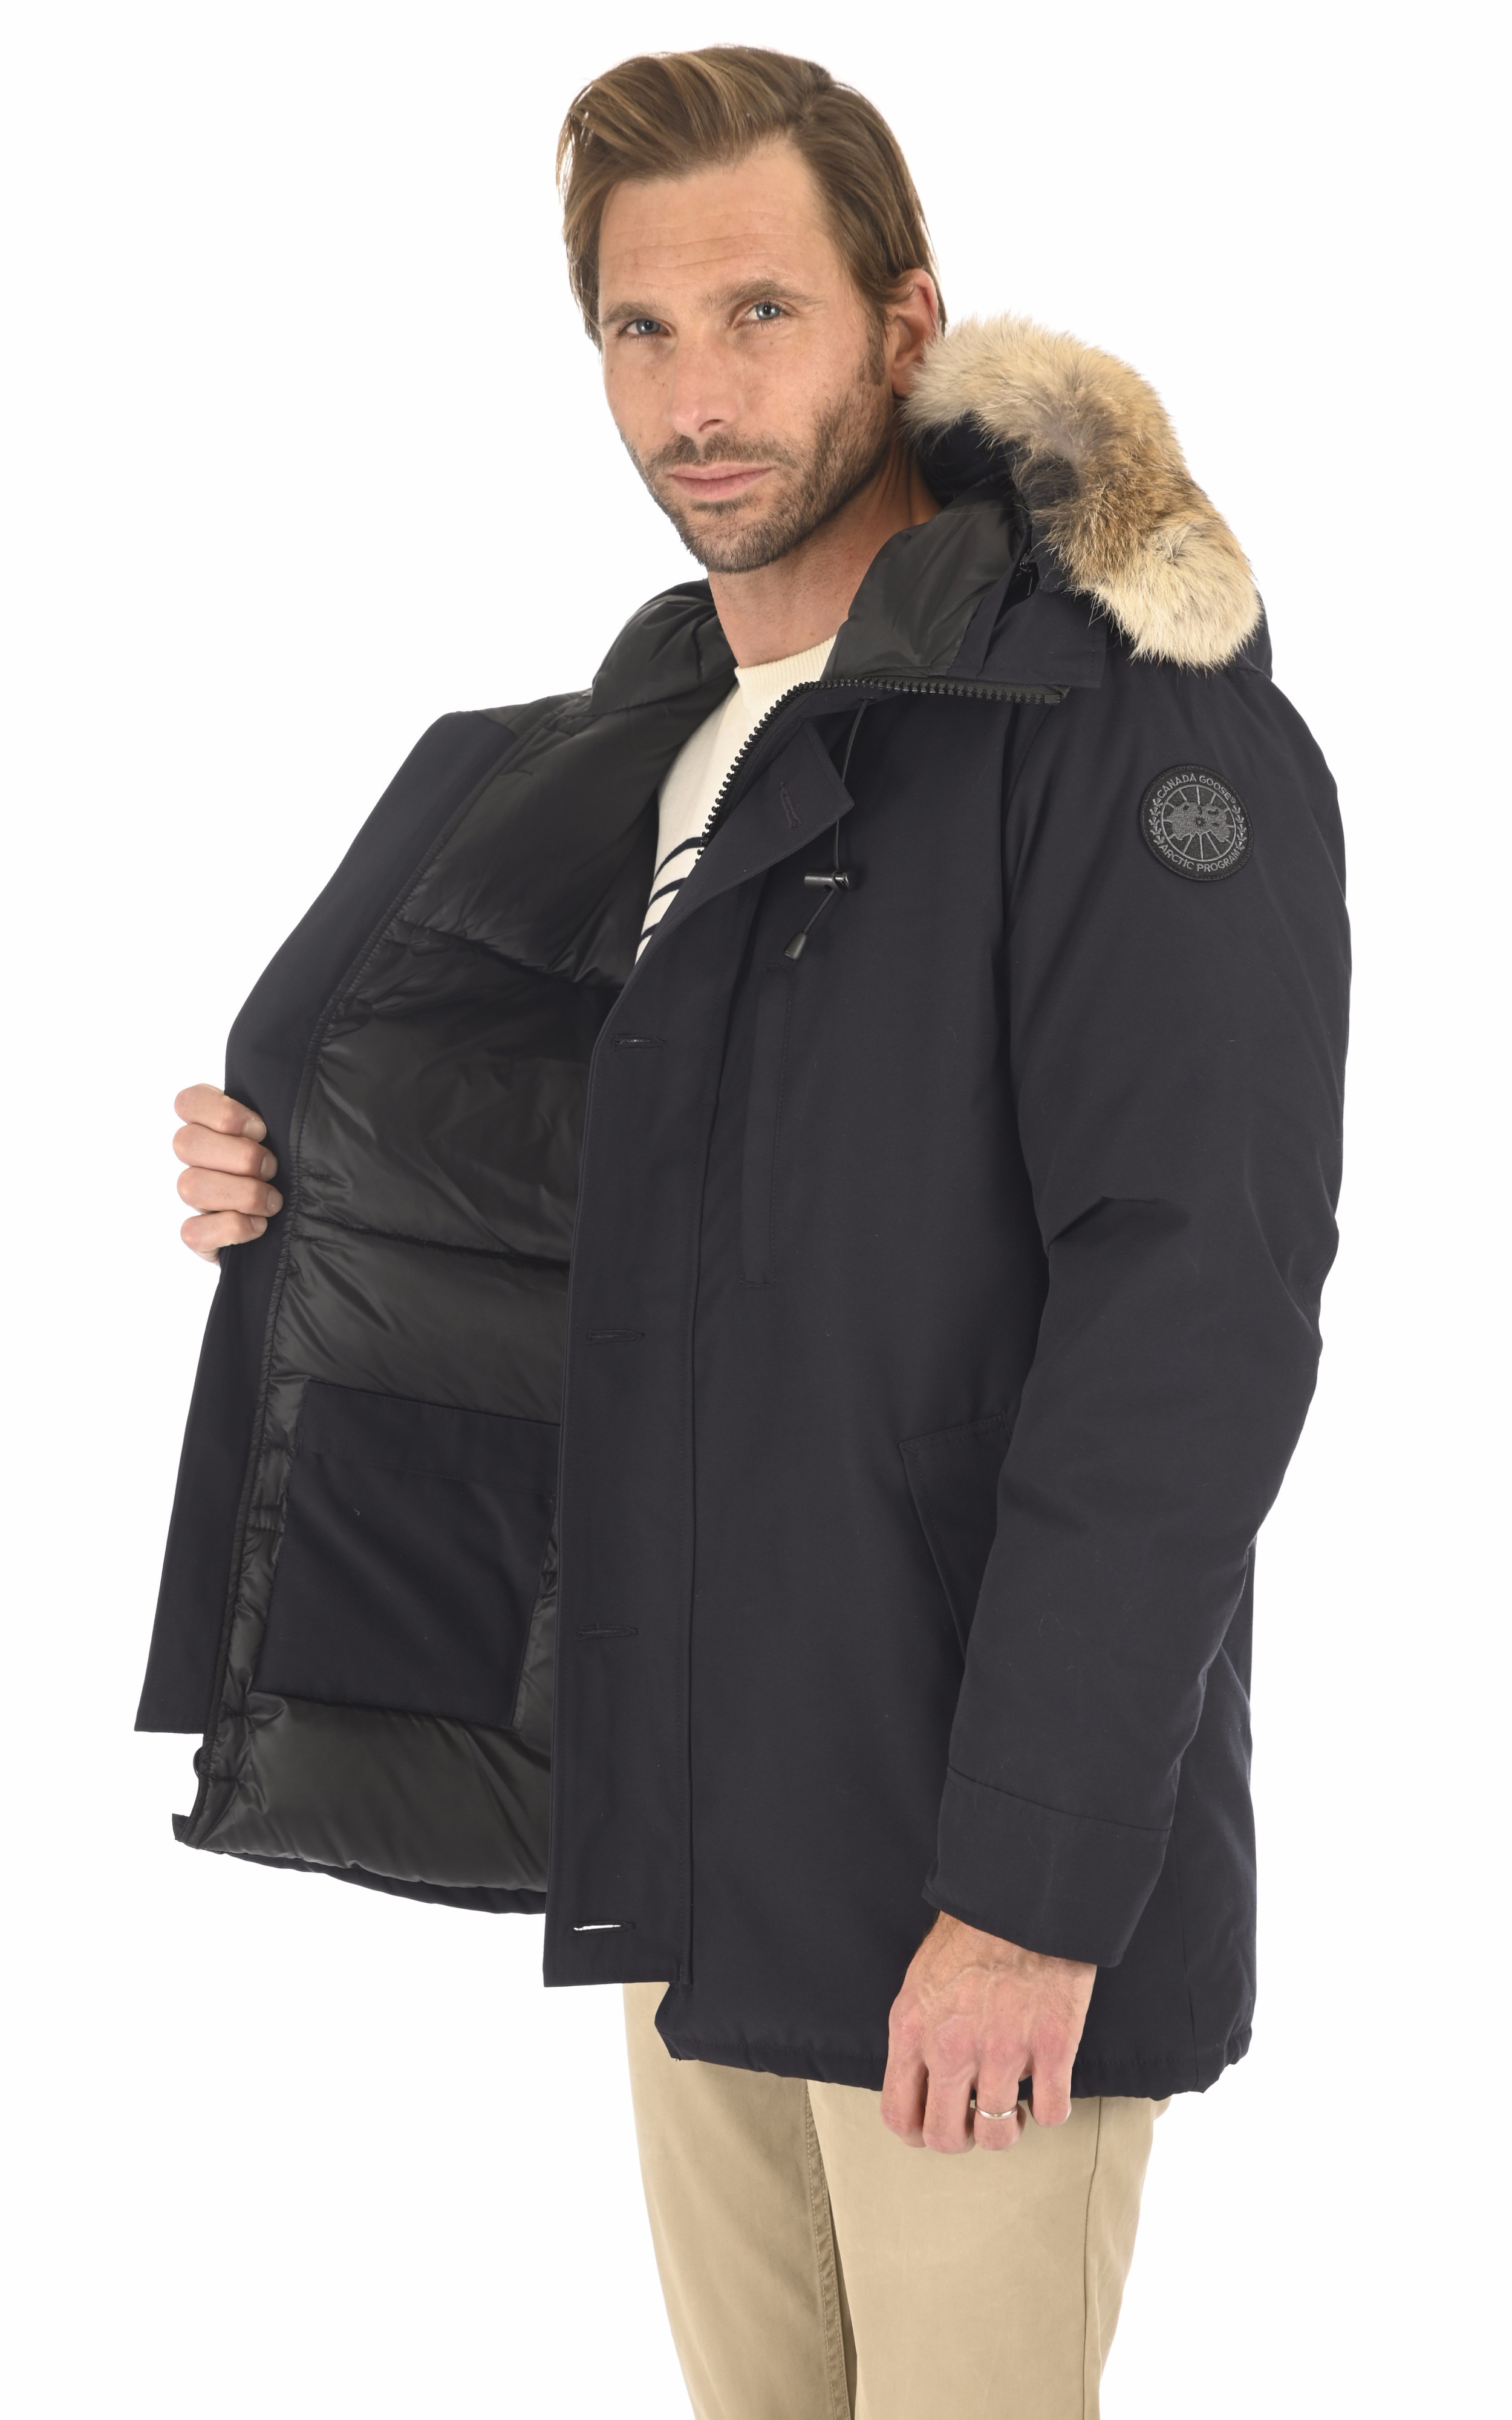 Parka The Chateau Black Disc Navy Canada Goose